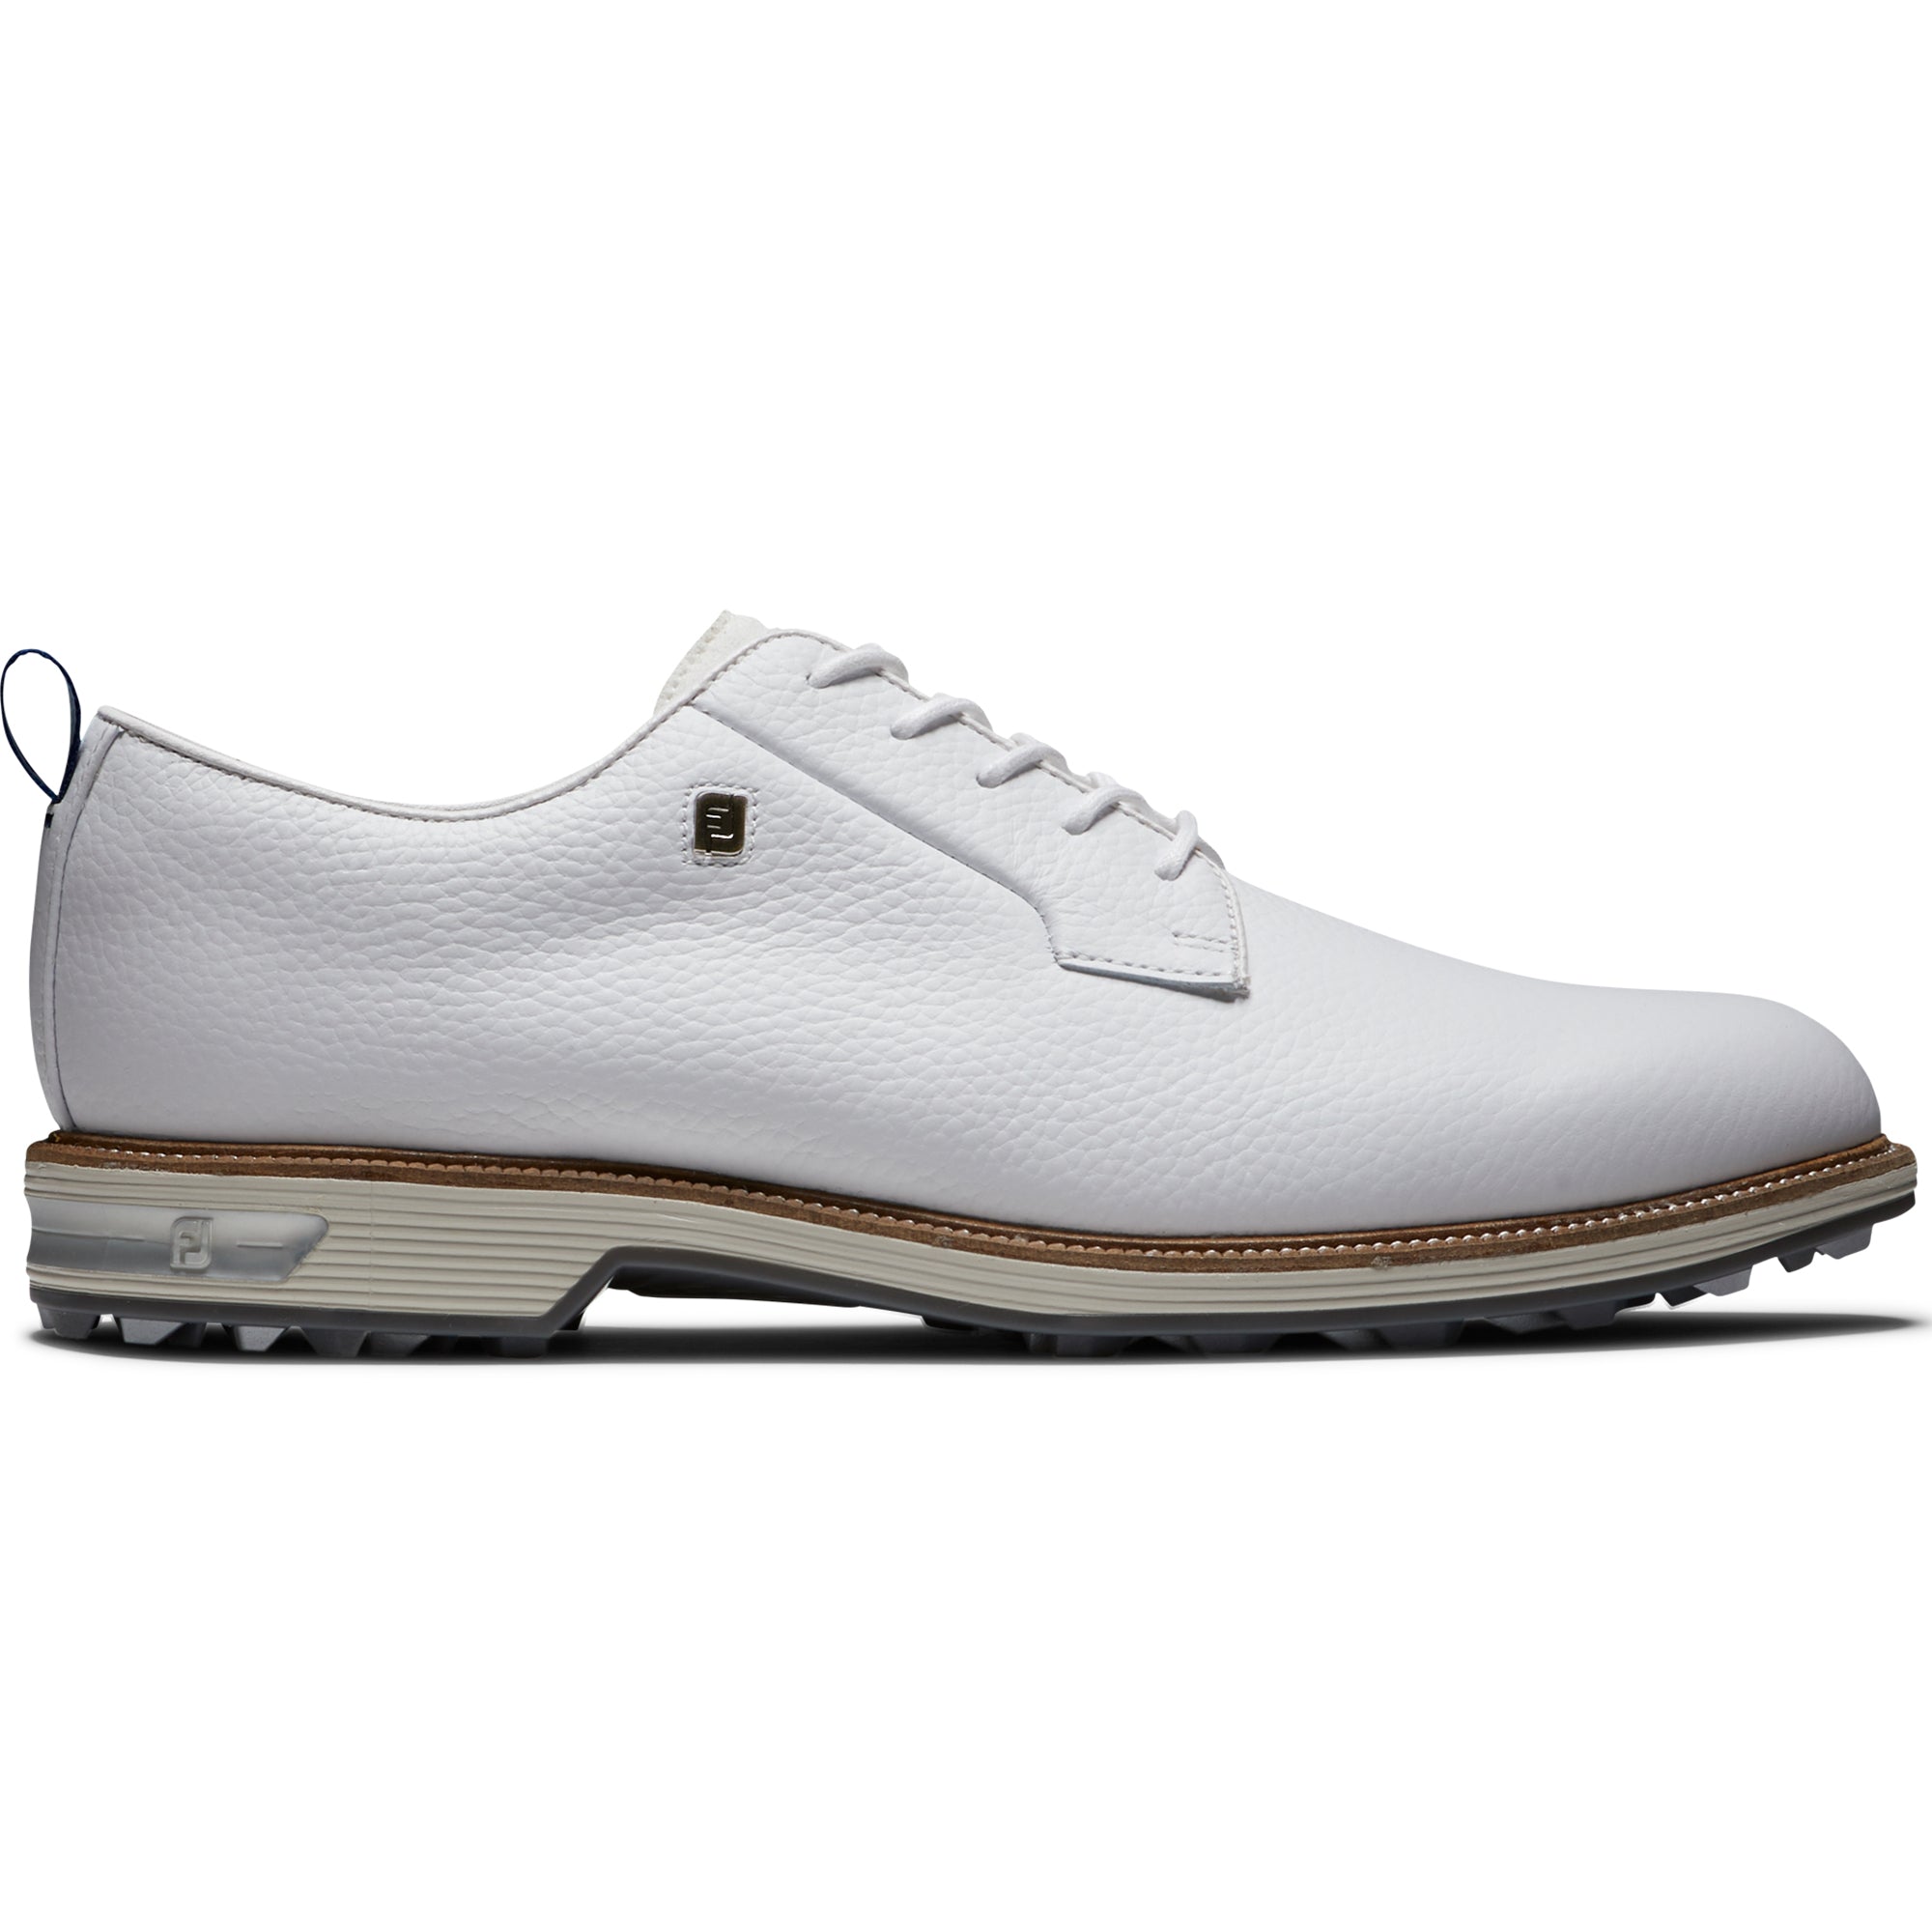 FootJoy Premiere Series Field Golf Shoes 53986 White | Function18